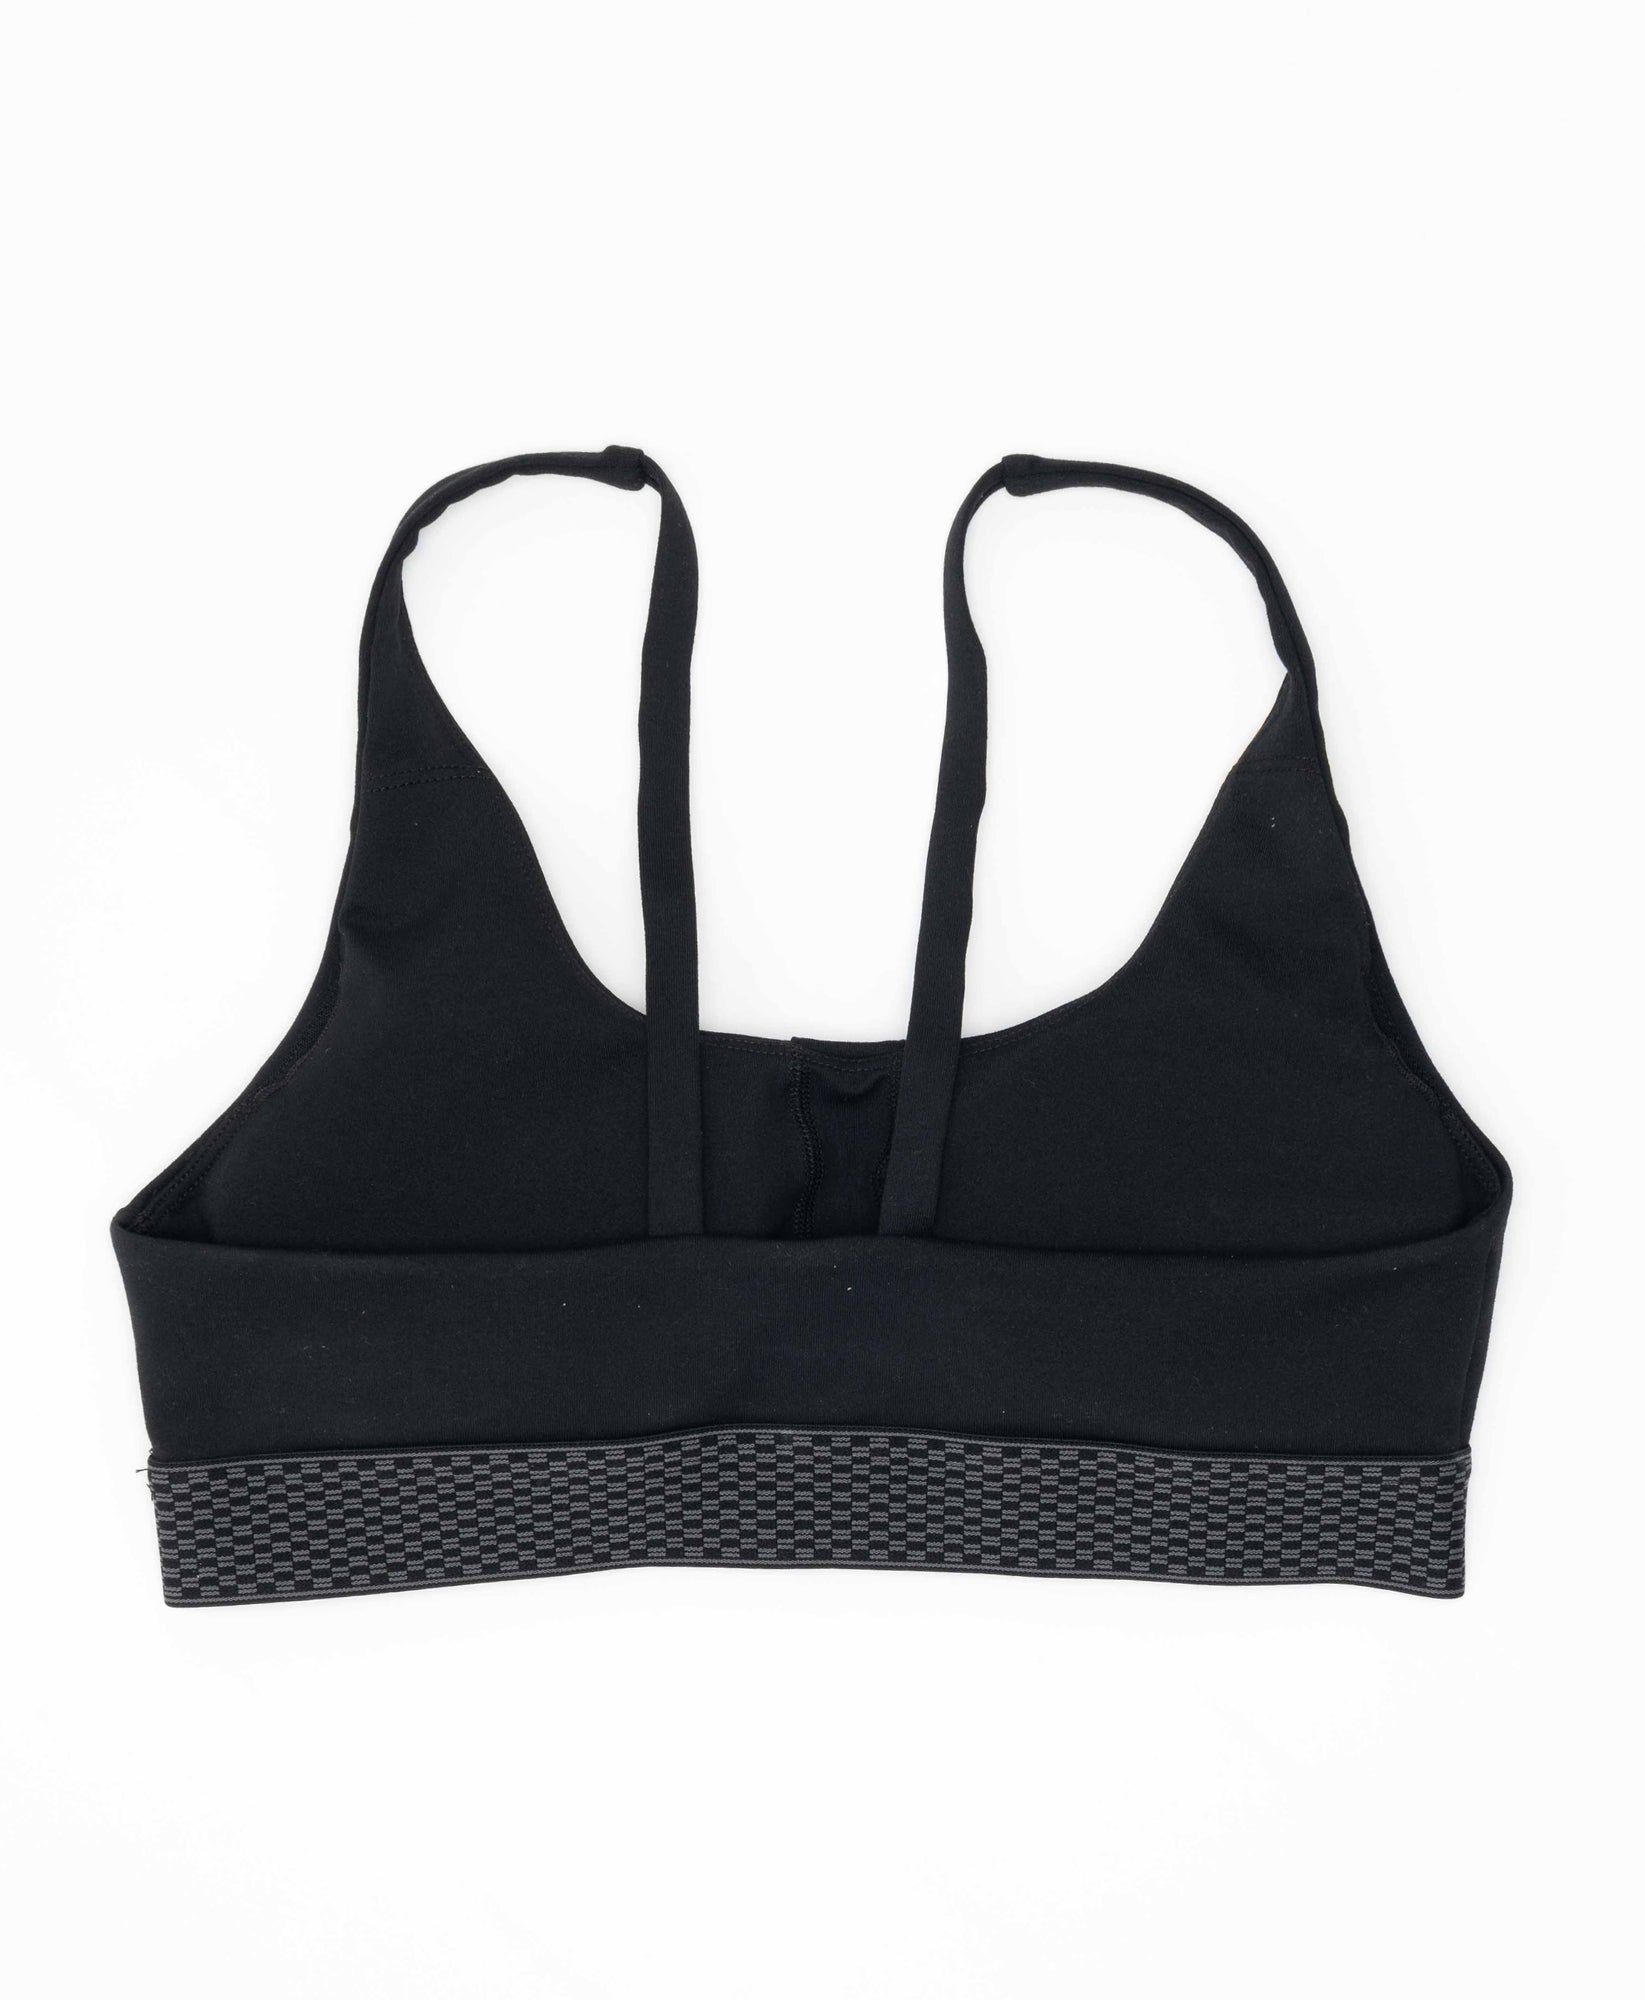 Women's Keyhole Bra in Asphalt Made With Recycled Nylon – Wear One's At